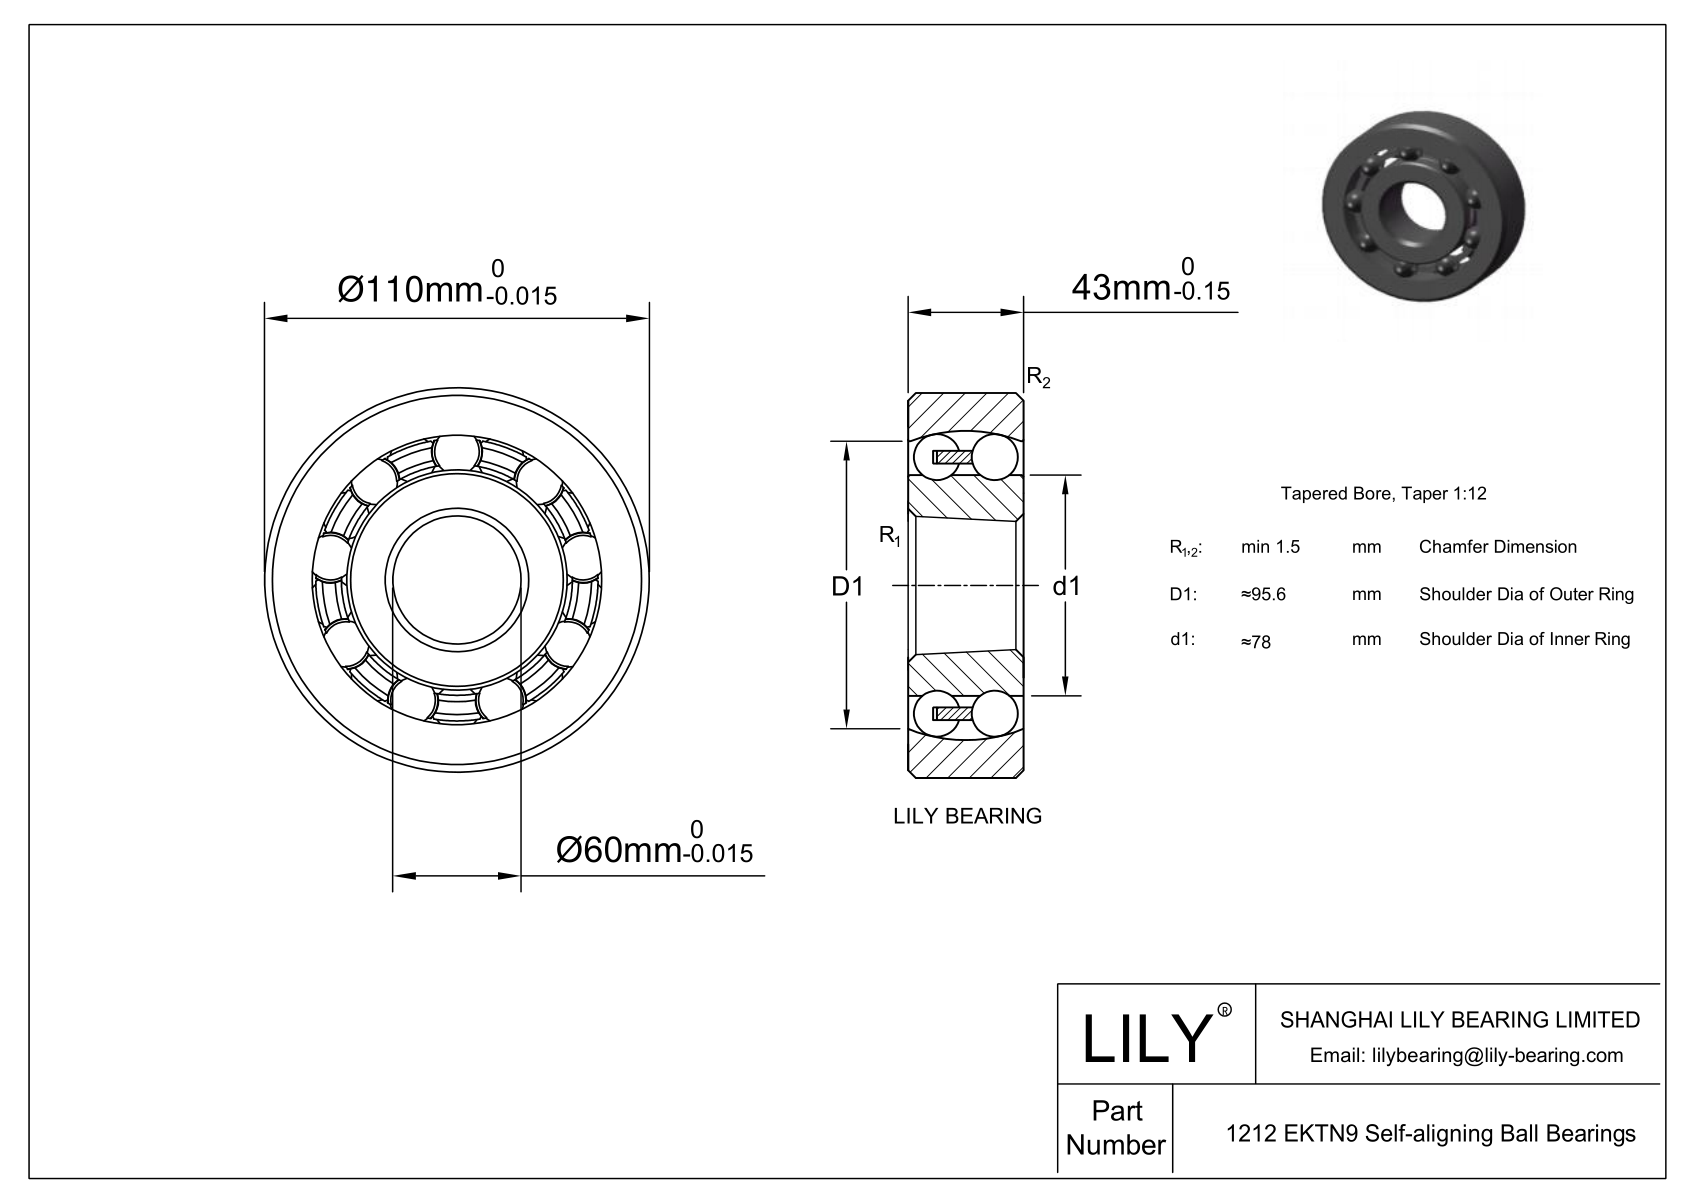 CE1212SI Silicon Nitride Self Aligning Ball Bearings cad drawing